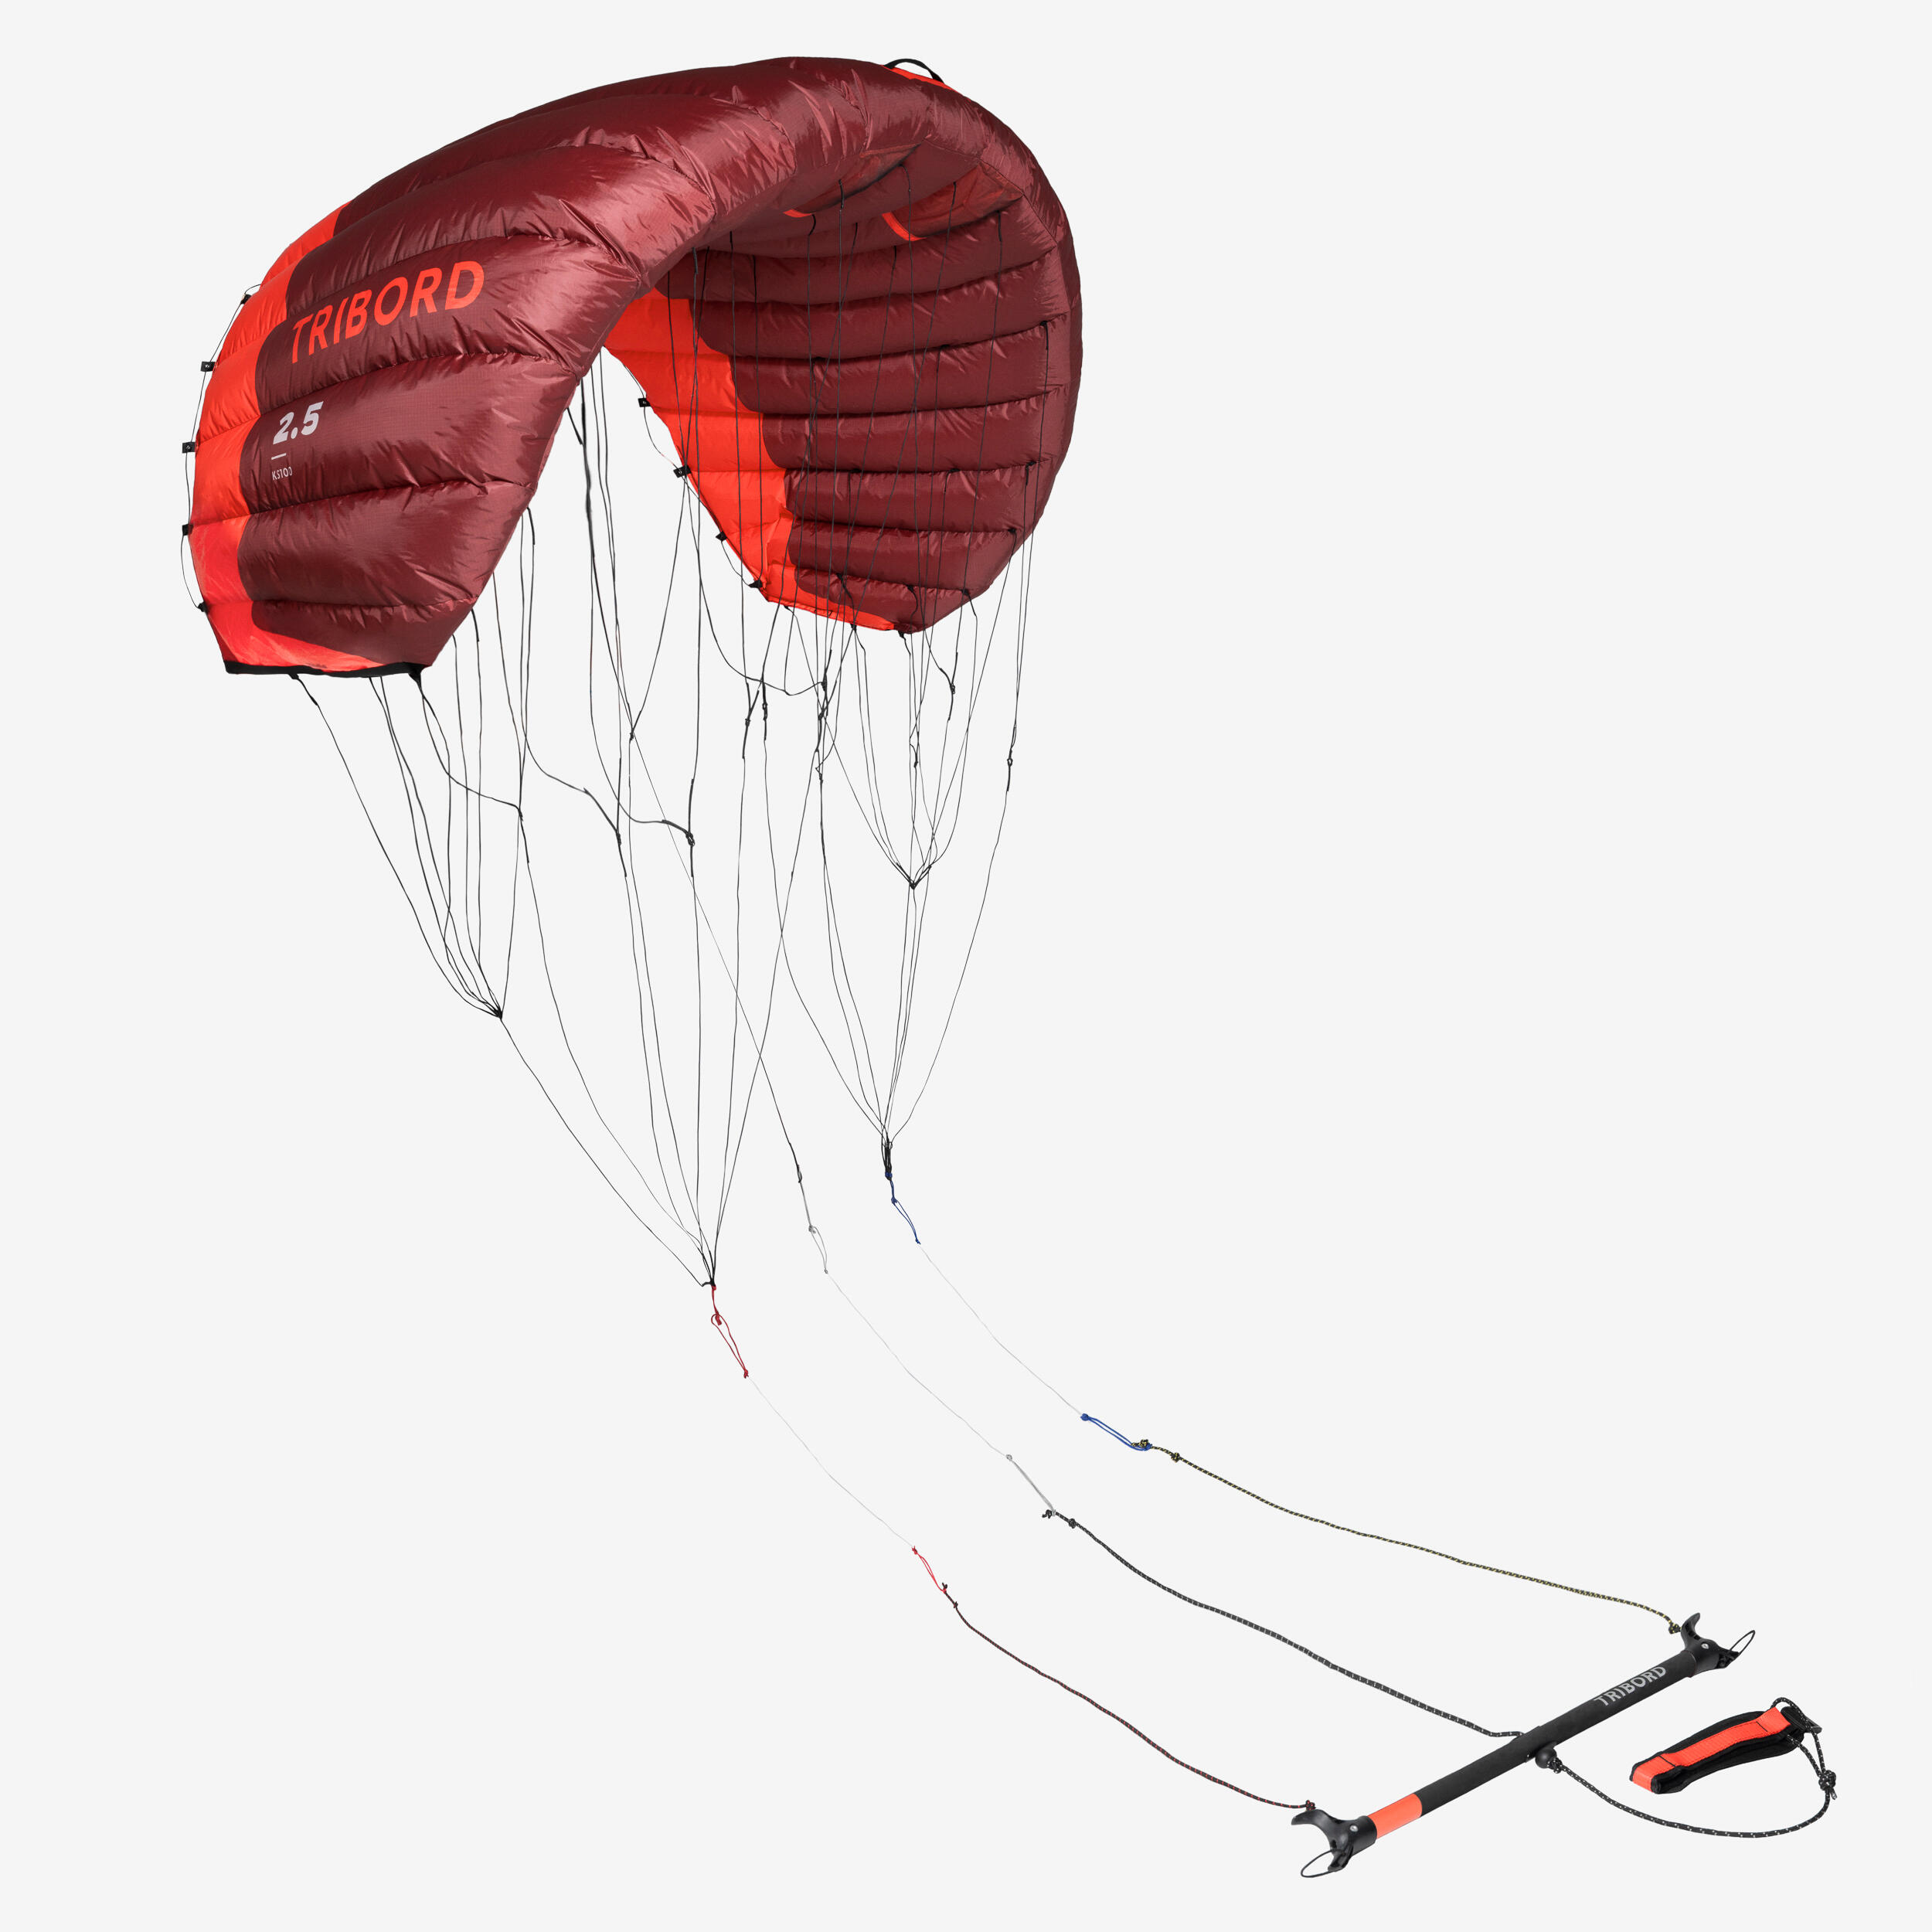 TRACTION KITE KS100 2.5 m2 red - with bar 3/7